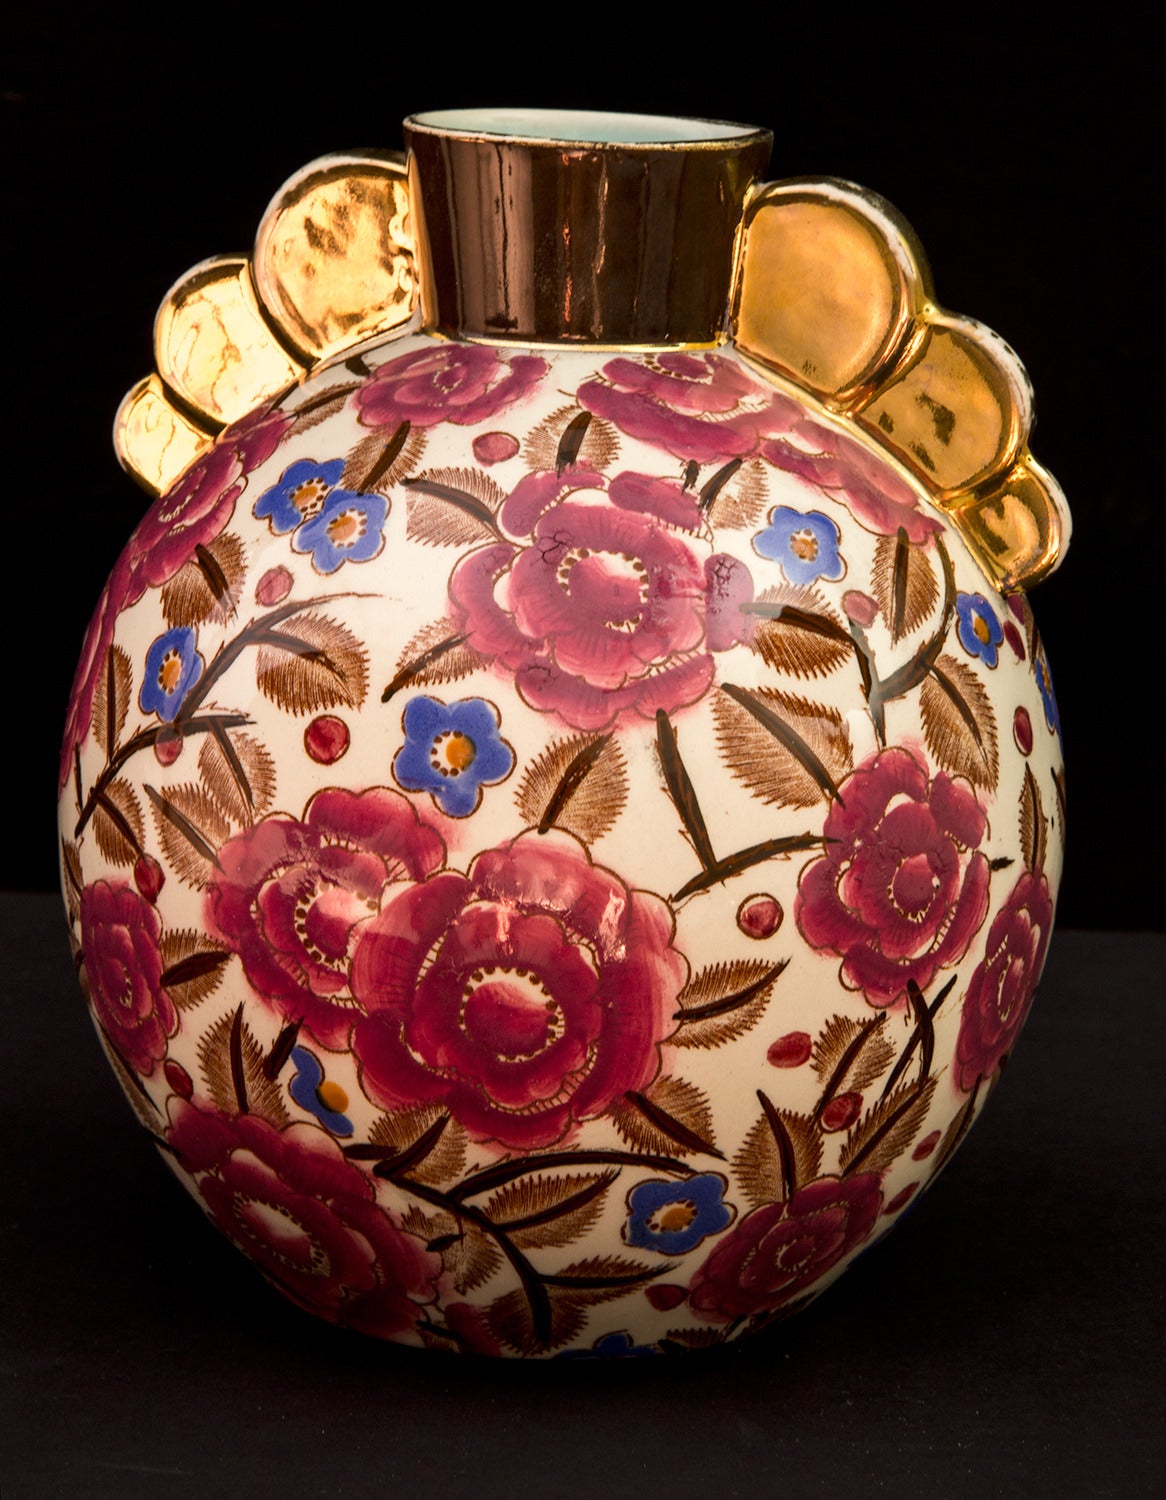 Beautiful hand-painted vase with overall flower designs on bulbous body, gilt handles0, hallmarked Boch Frères La Louvière, Made in Belgium Fabrication Belge Boch Fres 1277 approximately 7.5” high, circa 1930s. Classic and timeless!